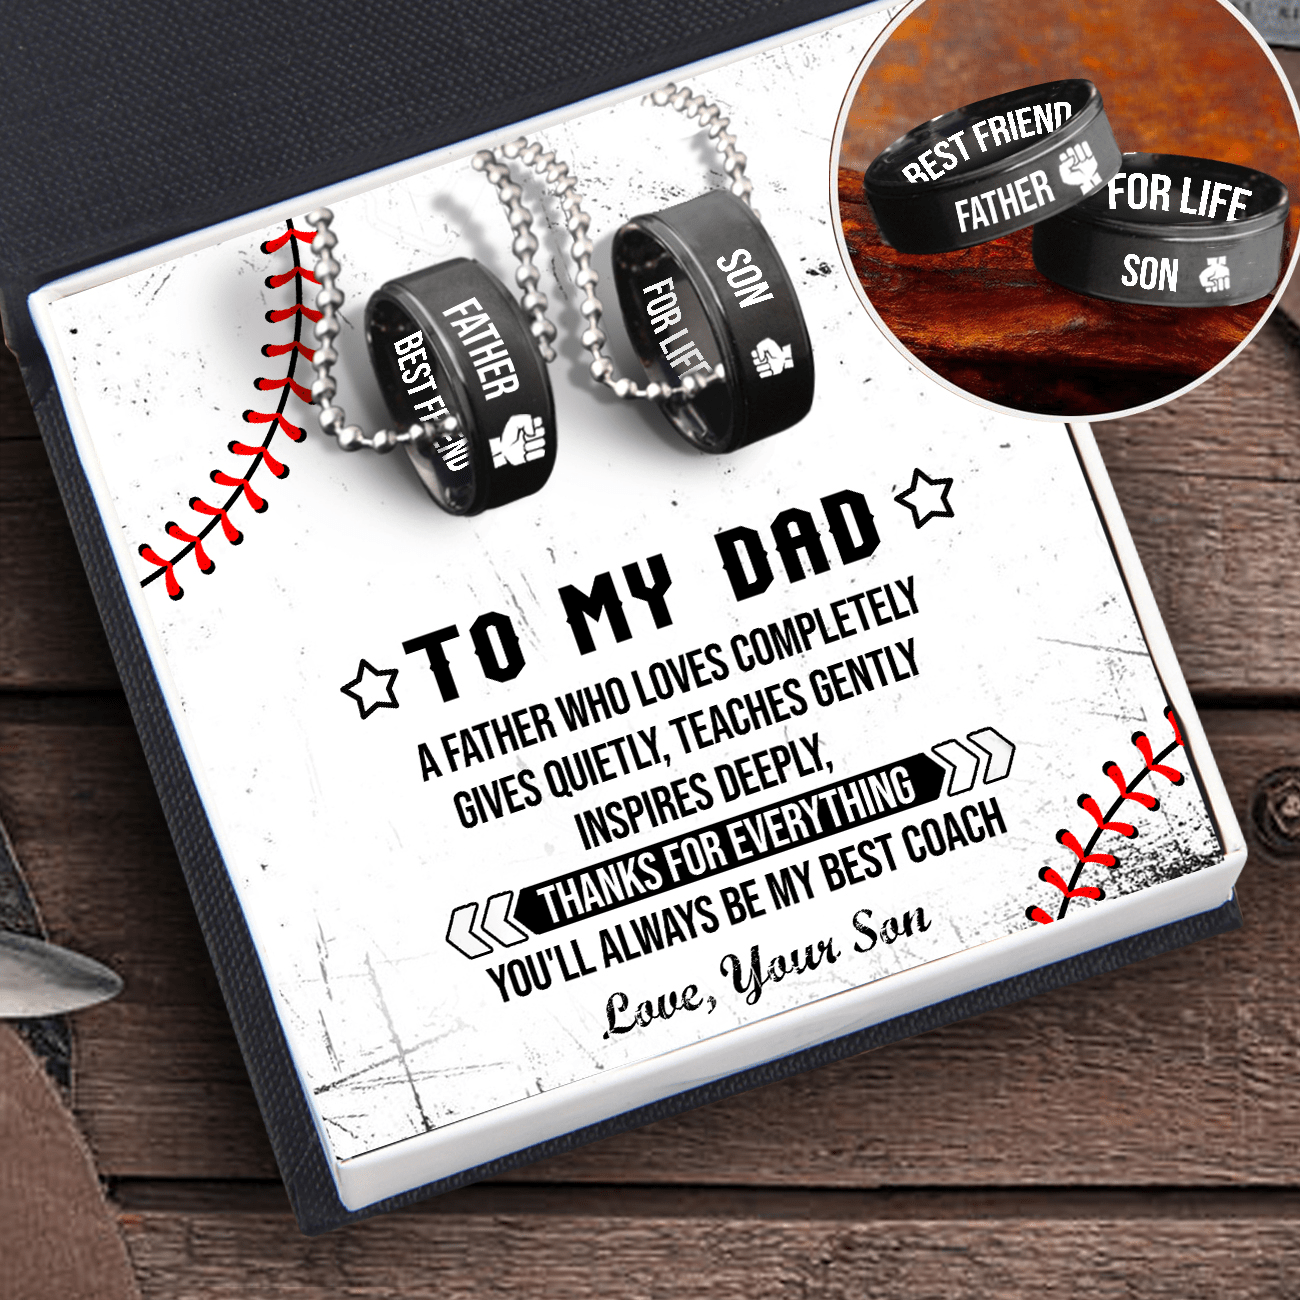 Couple Pendant Necklaces - Baseball - To My Dad - From Son - You'll Always Be My Best Coach - Gnw18002